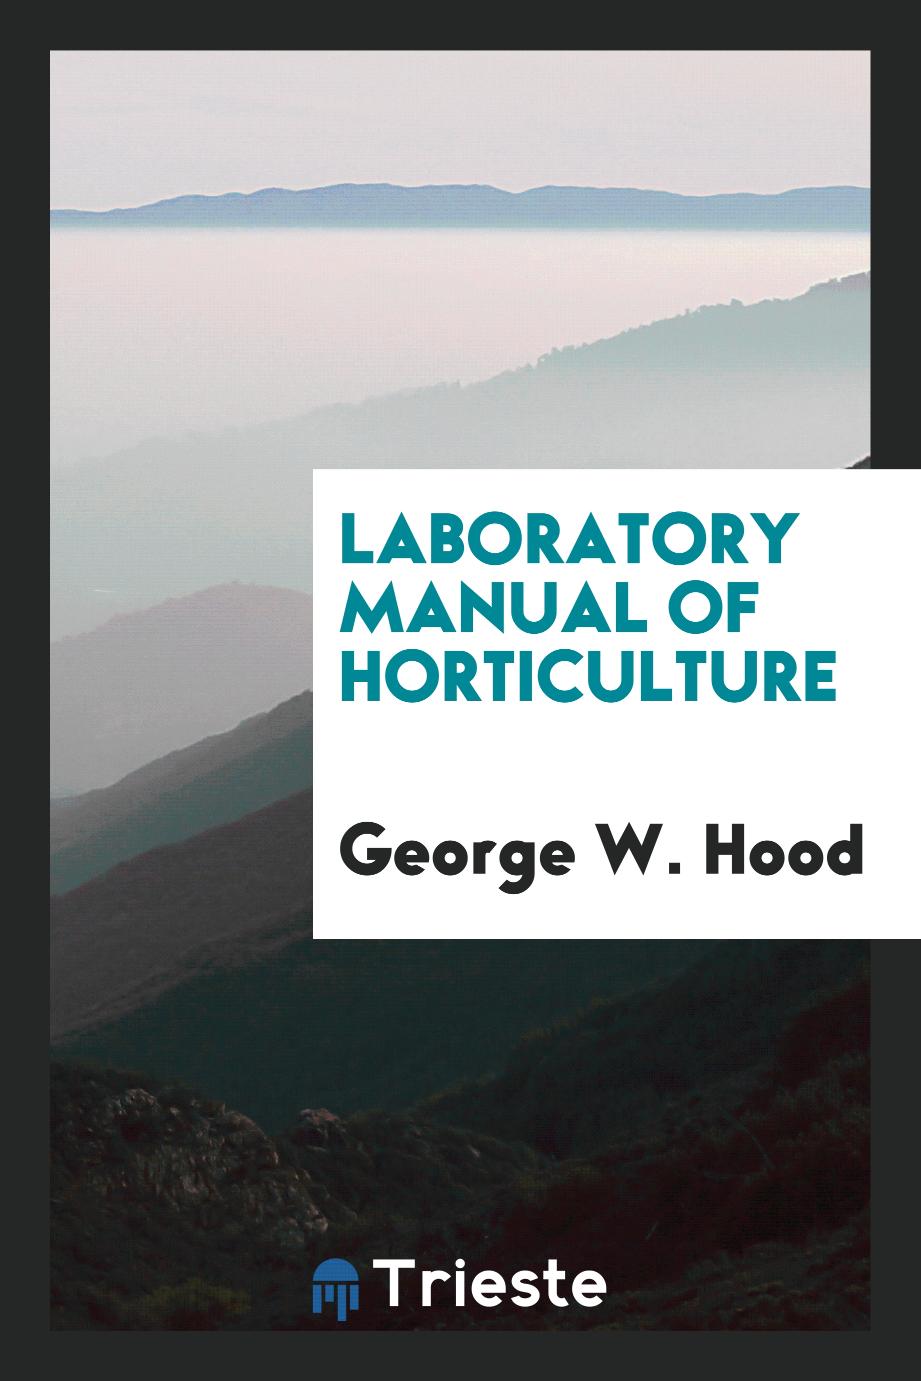 Laboratory manual of horticulture